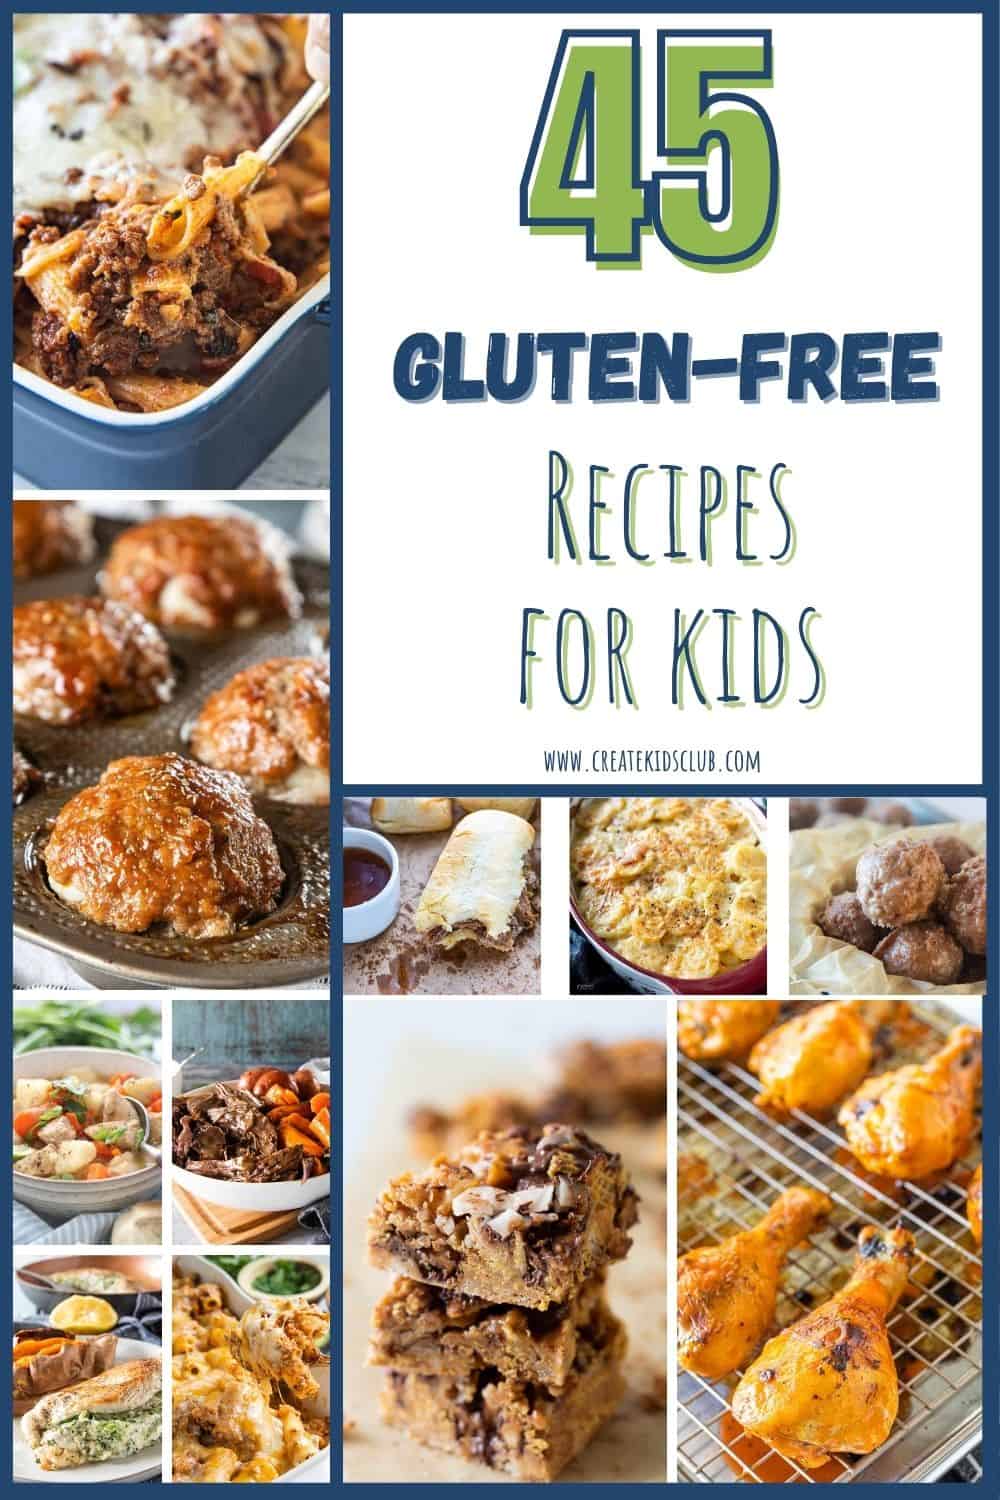 11 photos of gluten free recipes for kids.